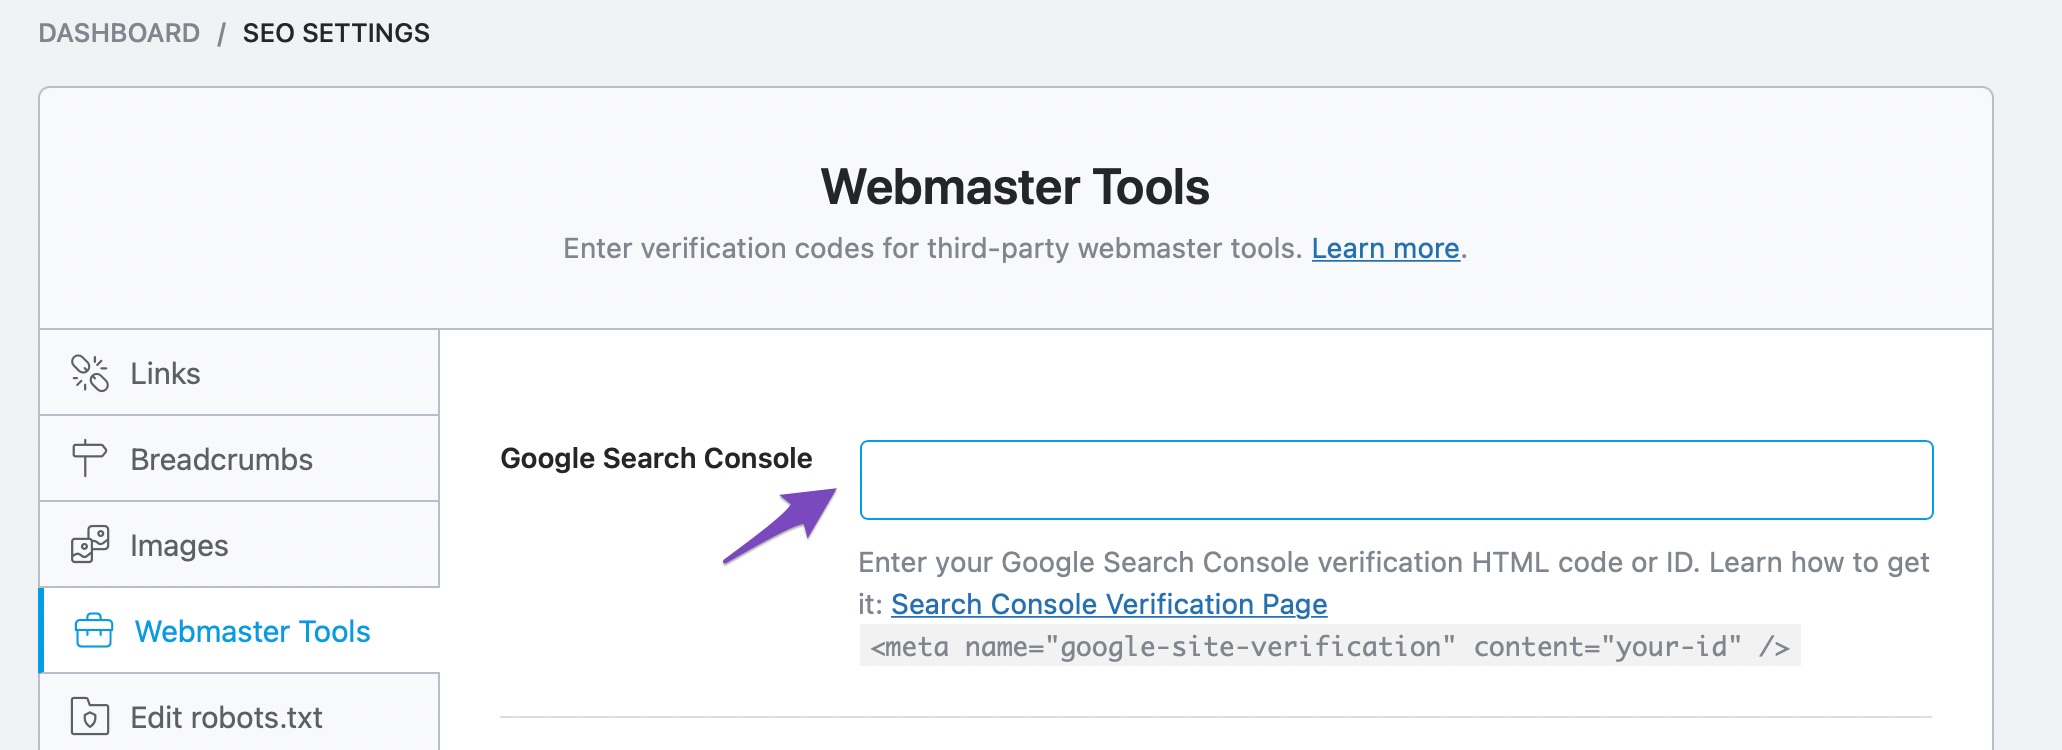 Navigate to the Webmaster Tools